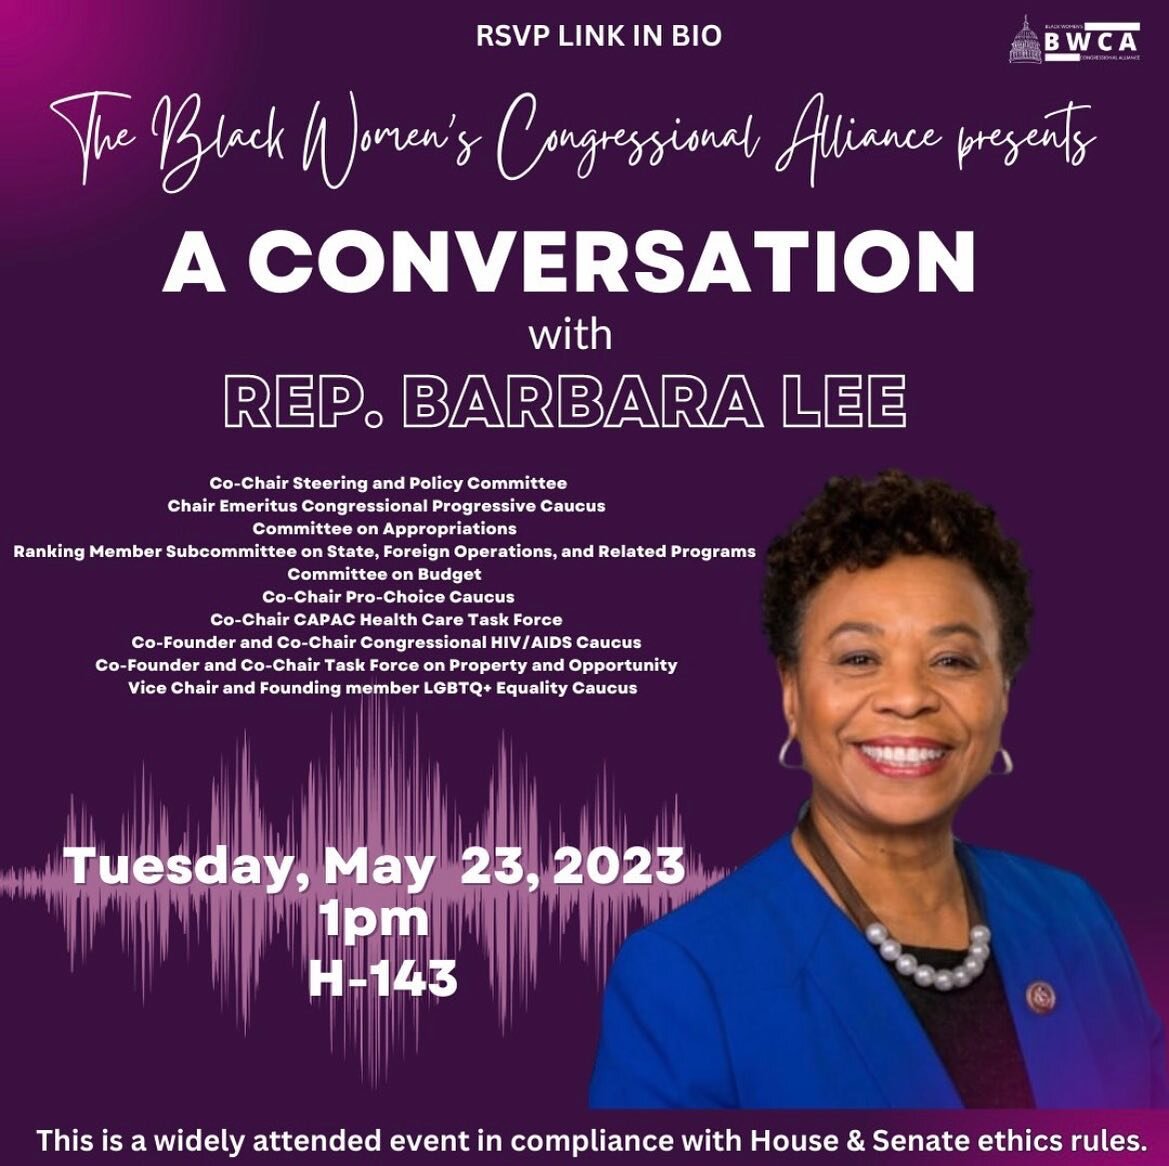 Join BWCA for an intimate conversation with Rep. Barbara Lee on Thursday, May 23, 2023 at 1pm in Room H-143 in the U.S. Capitol. Please RSVP at the link in our bio to attend.